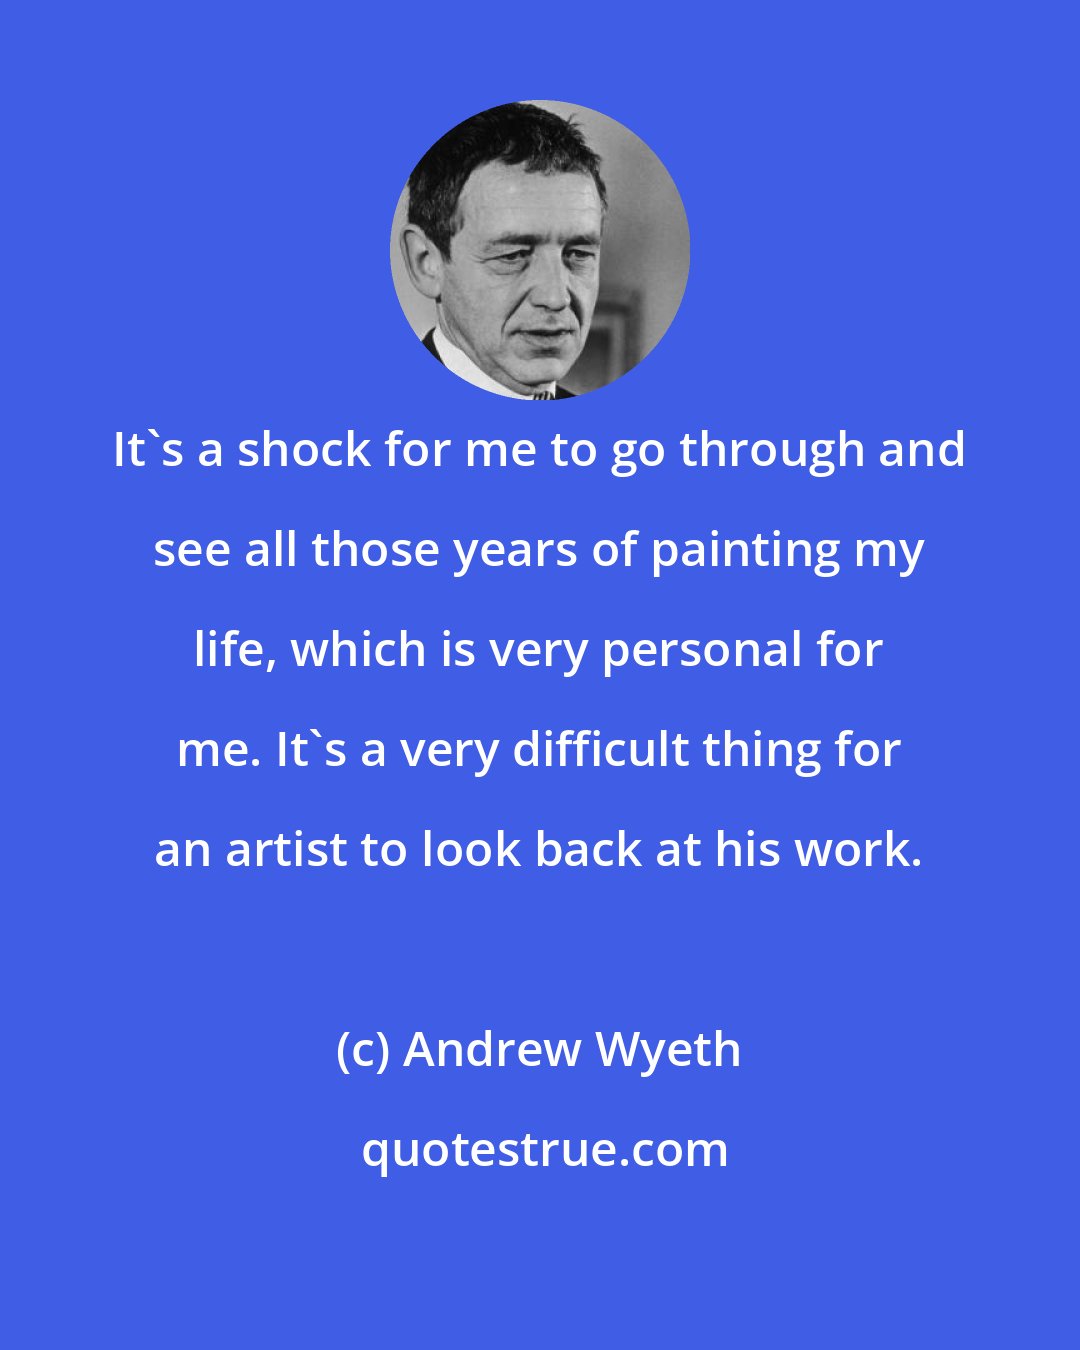 Andrew Wyeth: It's a shock for me to go through and see all those years of painting my life, which is very personal for me. It's a very difficult thing for an artist to look back at his work.